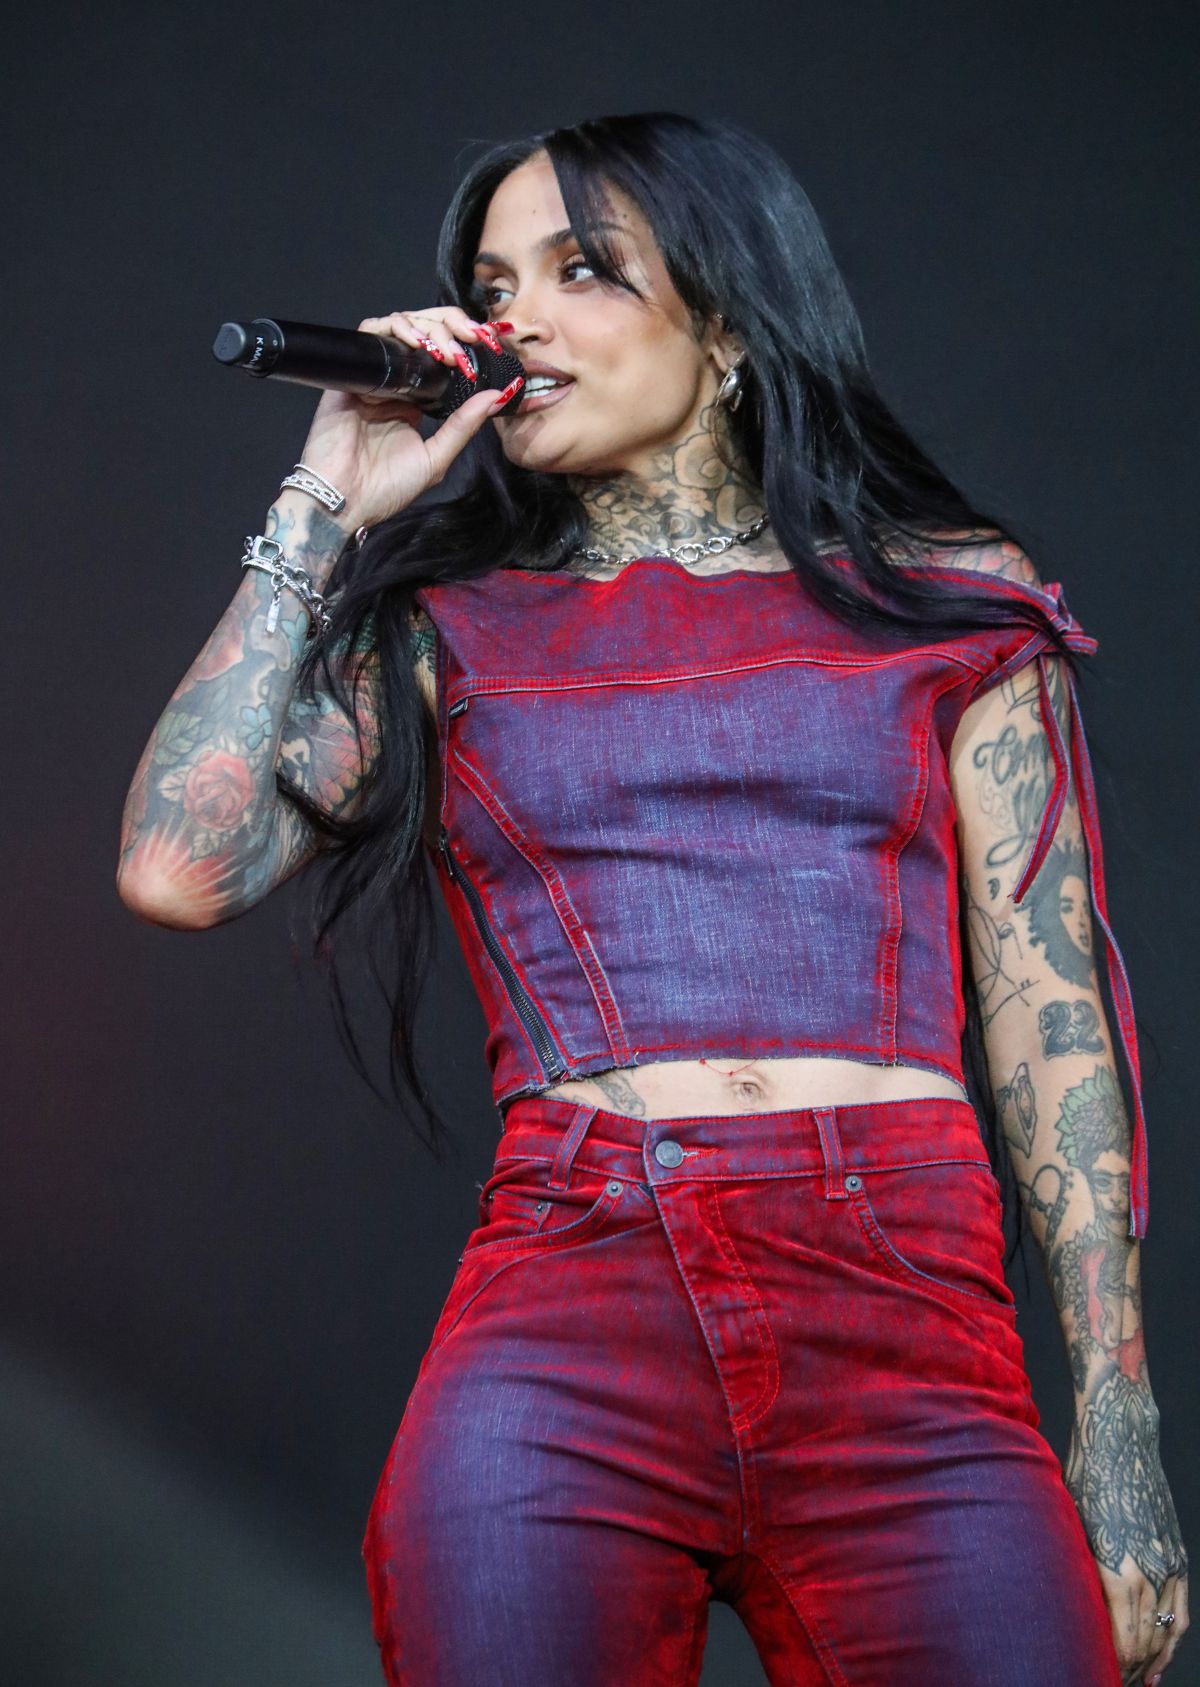 kehlani will be performing at the All Points East music festival